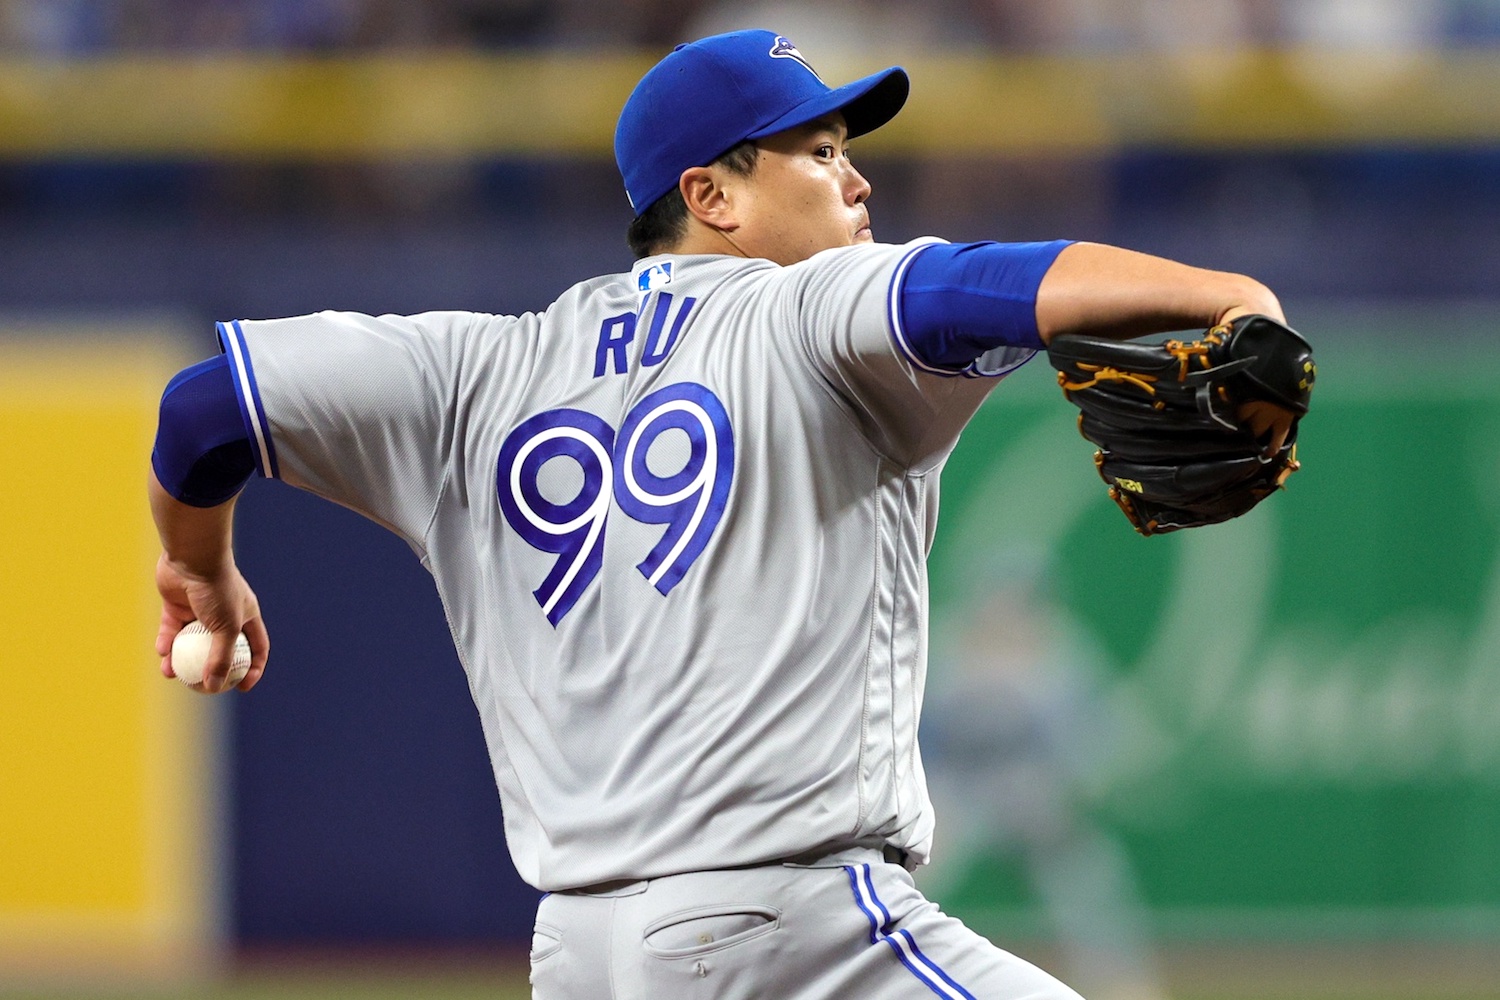 Sep 23, 2023; St. Petersburg, Florida, USA; Toronto Blue Jays starting pitcher Hyun Jin Ryu (99) throws a pitch against the Tampa Bay Rays in the fifth inning at Tropicana Field. Mandatory Credit: Nathan Ray Seebeck-USA TODAY Sports